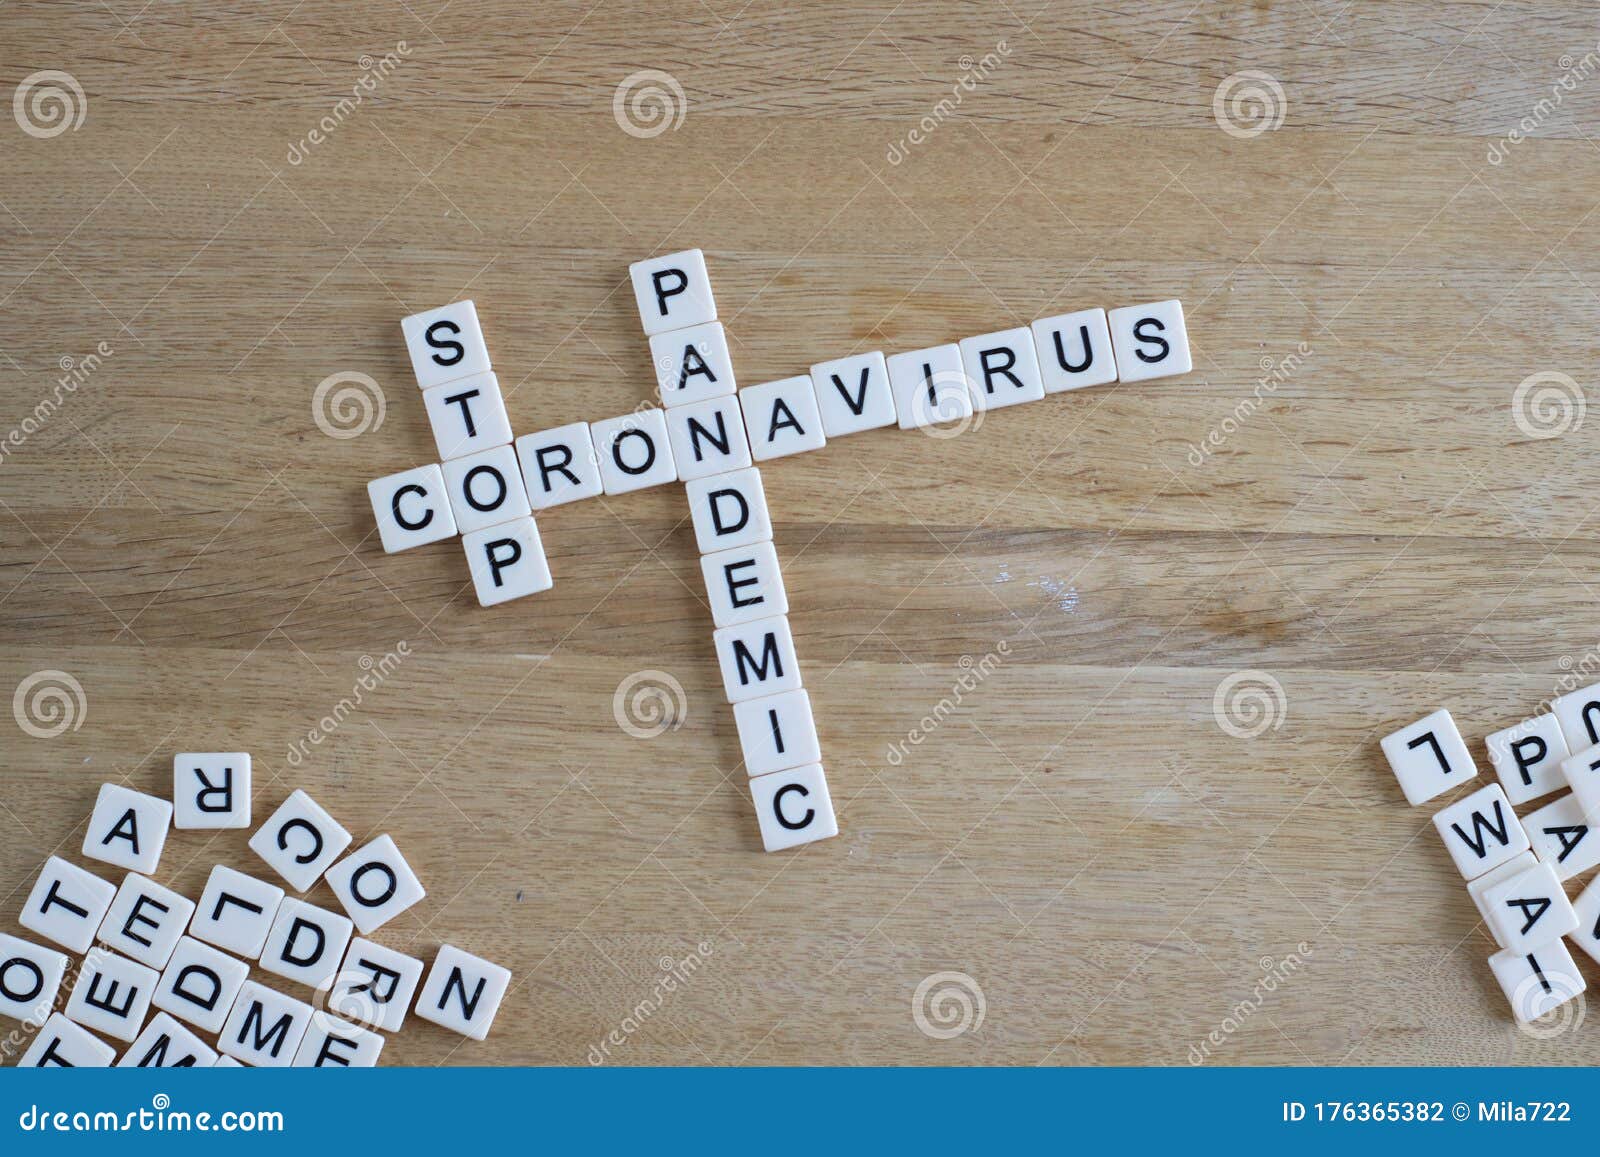 Scrabble Letters Spelling The Message Friends Have Fun At Home Home Entertainment In Quarantine For Coronavirus Stock Photo Image Of Letter Alphabet 176365382,Chicken Thigh Recipes